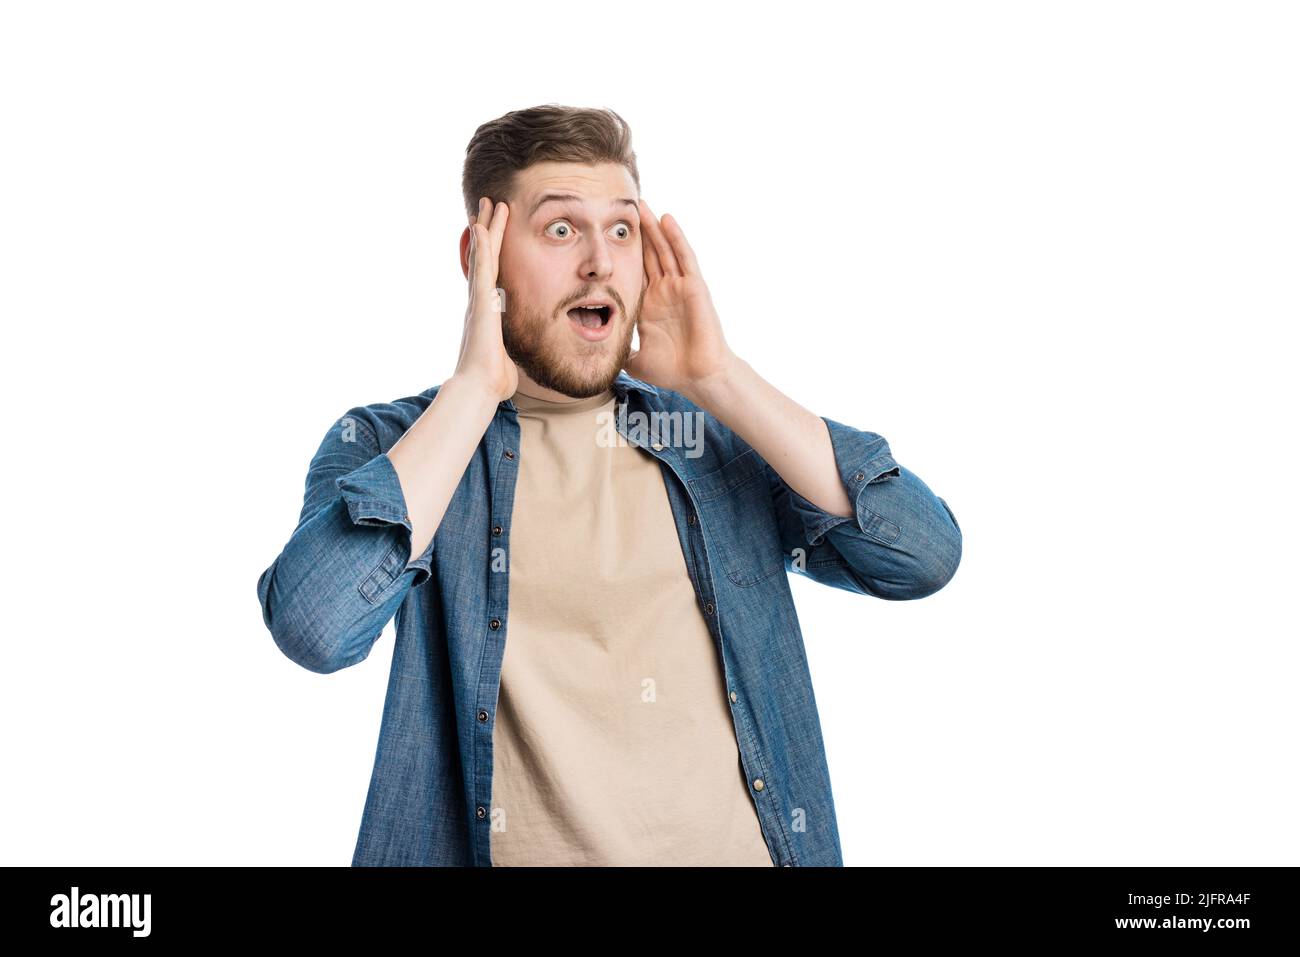 Happy man with surprised expression Stock Photo